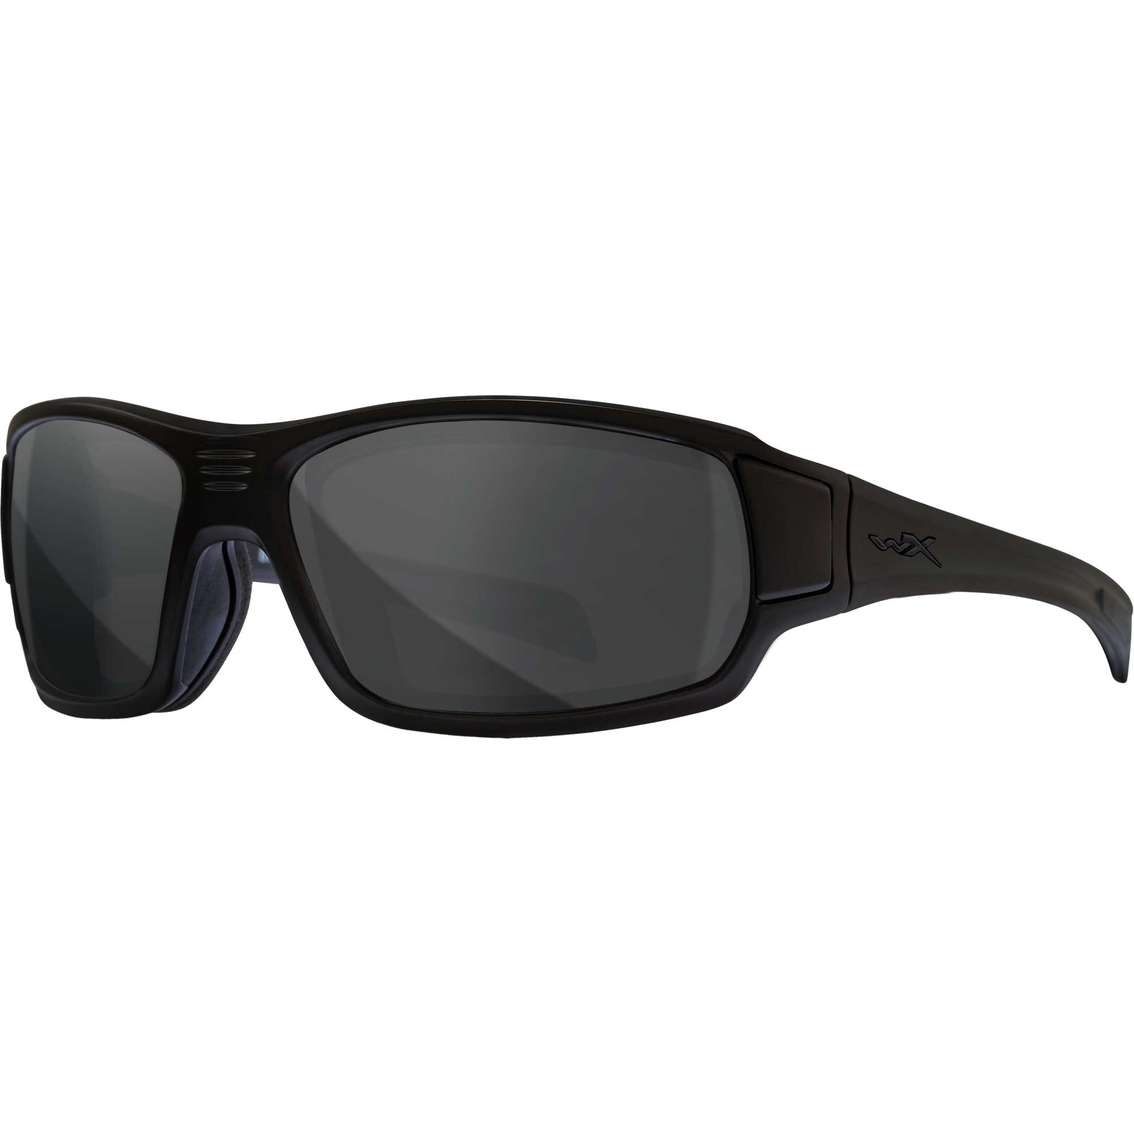 Wiley X Breach Sunglasses Ccbrh01 | Sunglasses | Clothing & Accessories ...